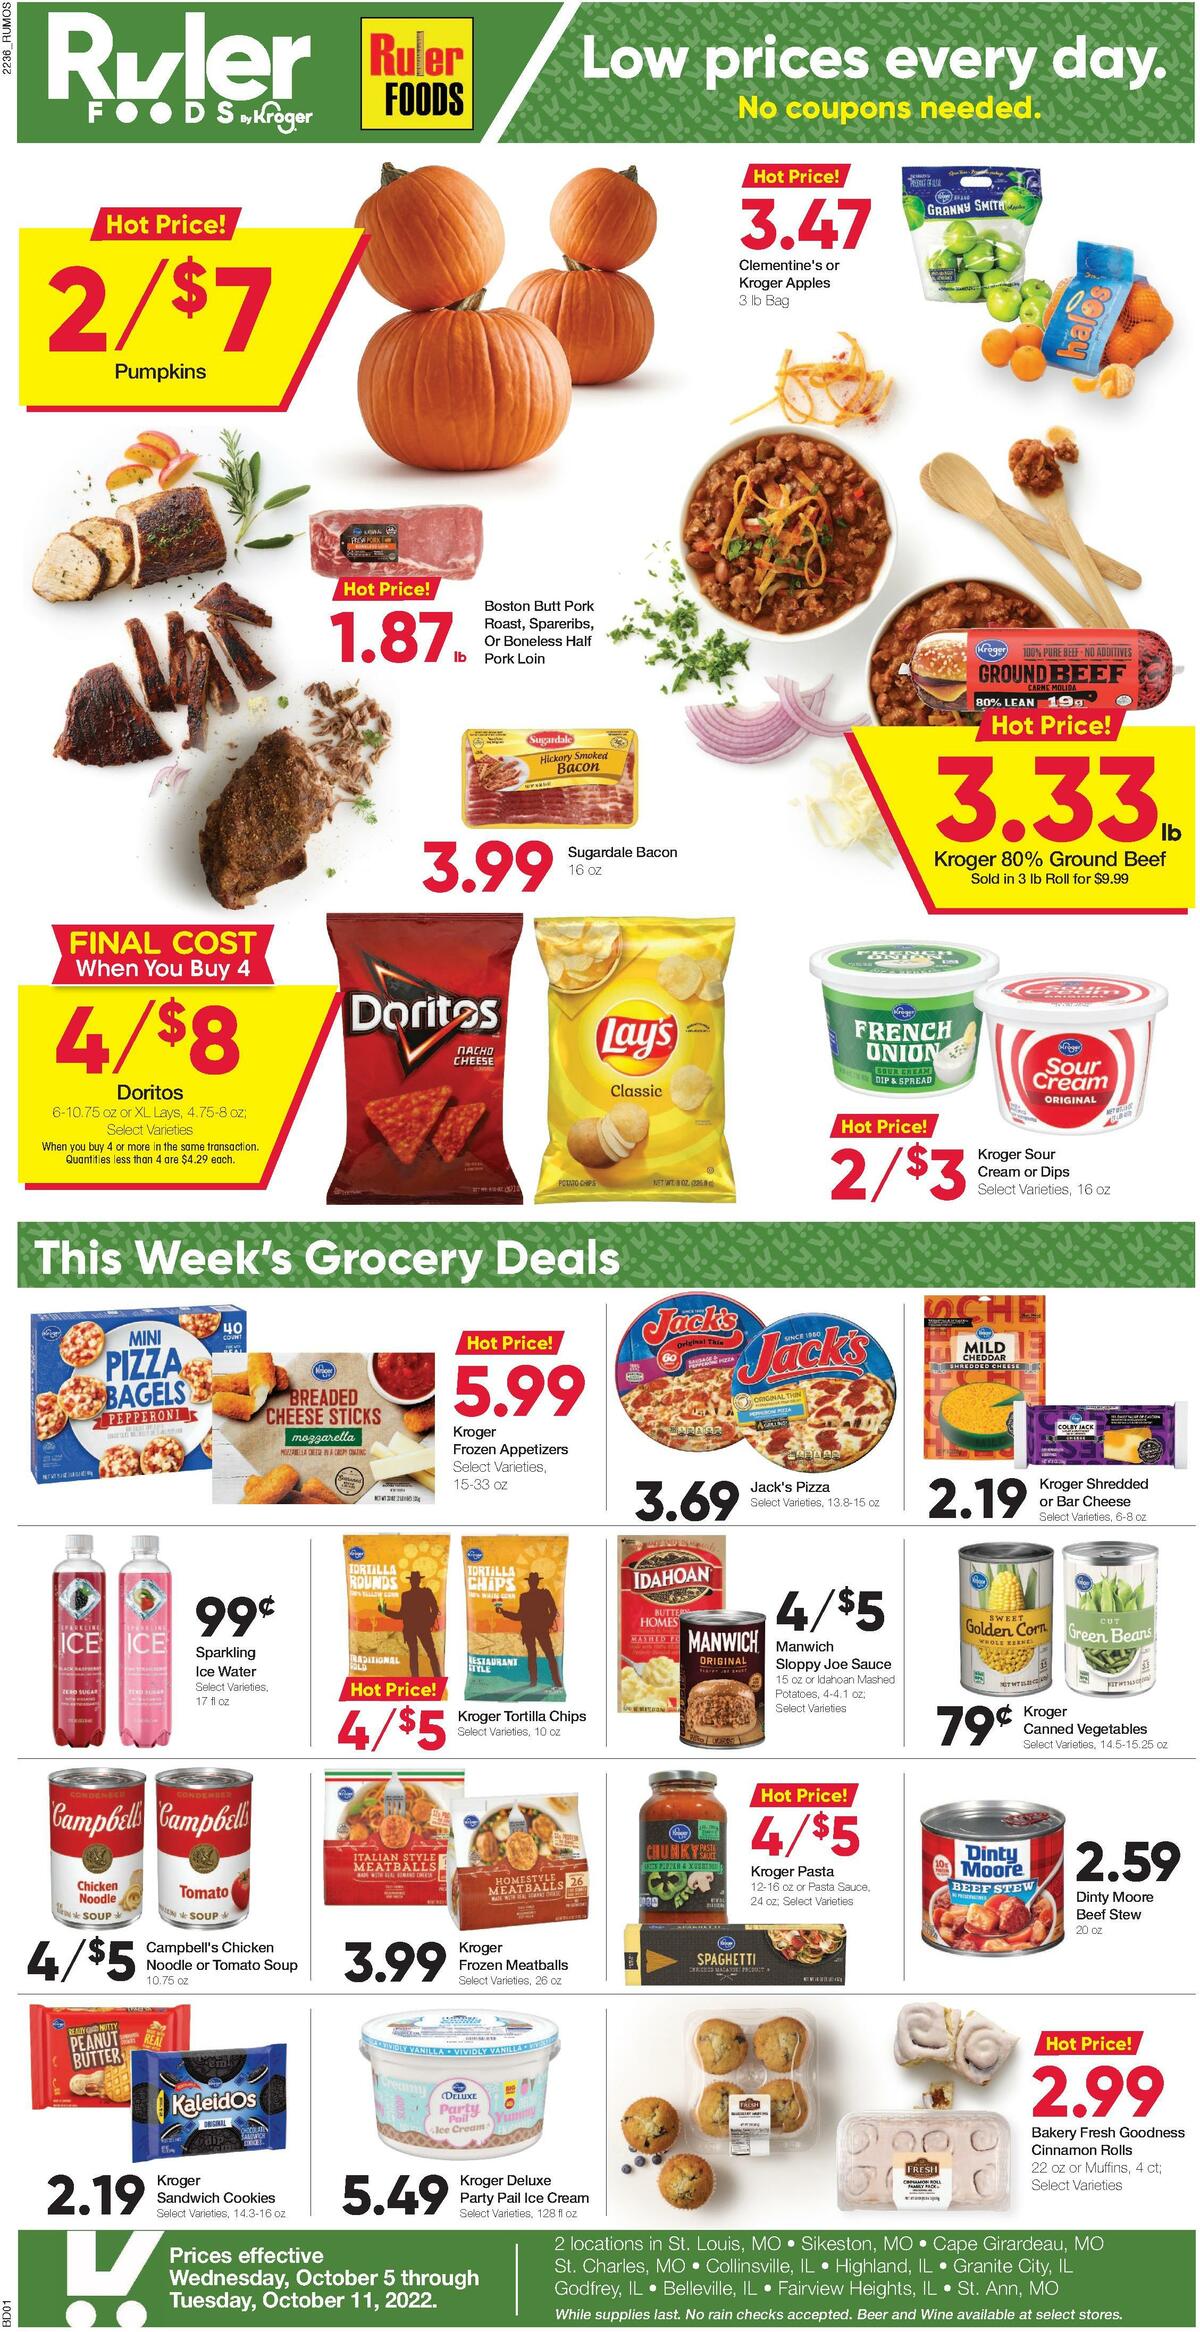 Ruler Foods Weekly Ad from October 5